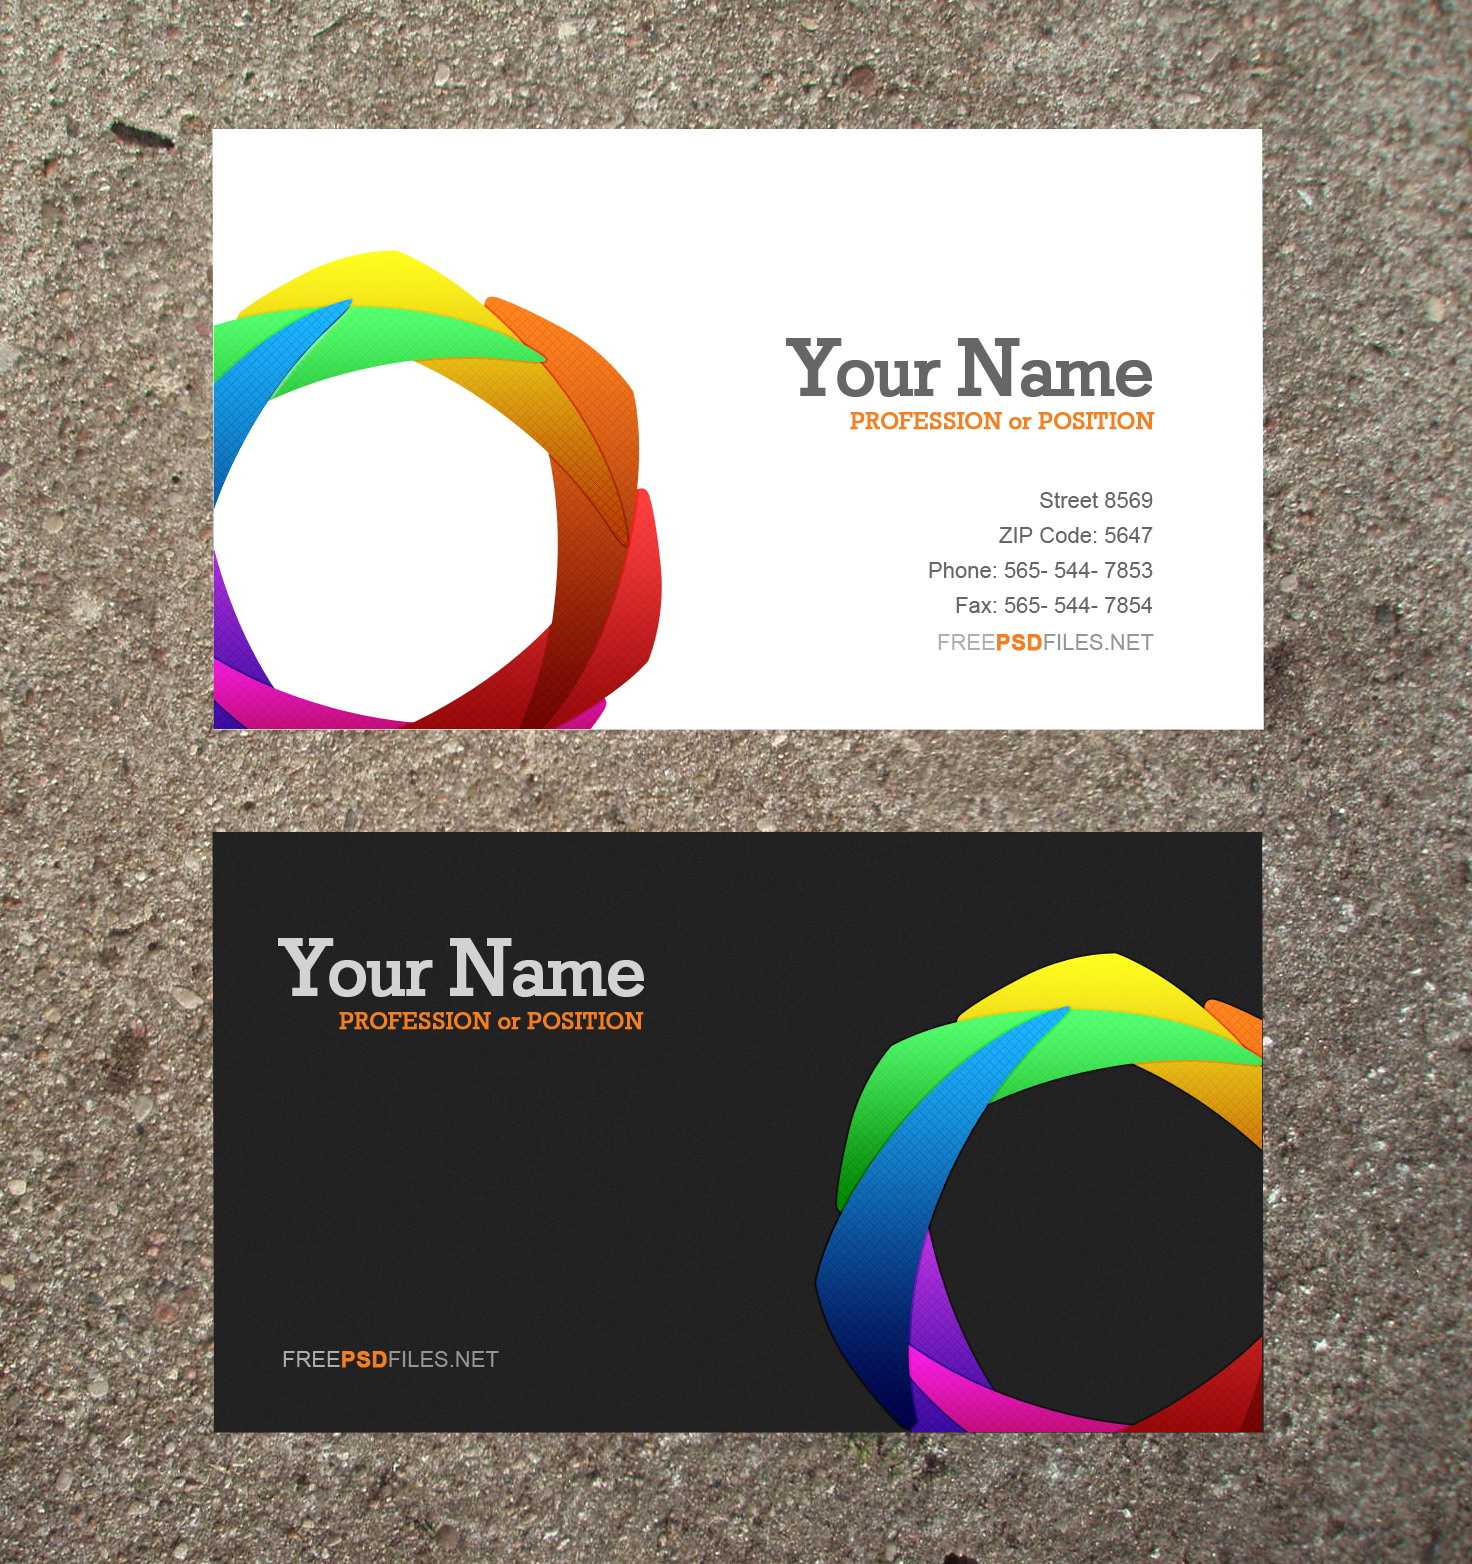 28+ [ Business Card Powerpoint Templates Free ] | Free In Business Card Template Powerpoint Free